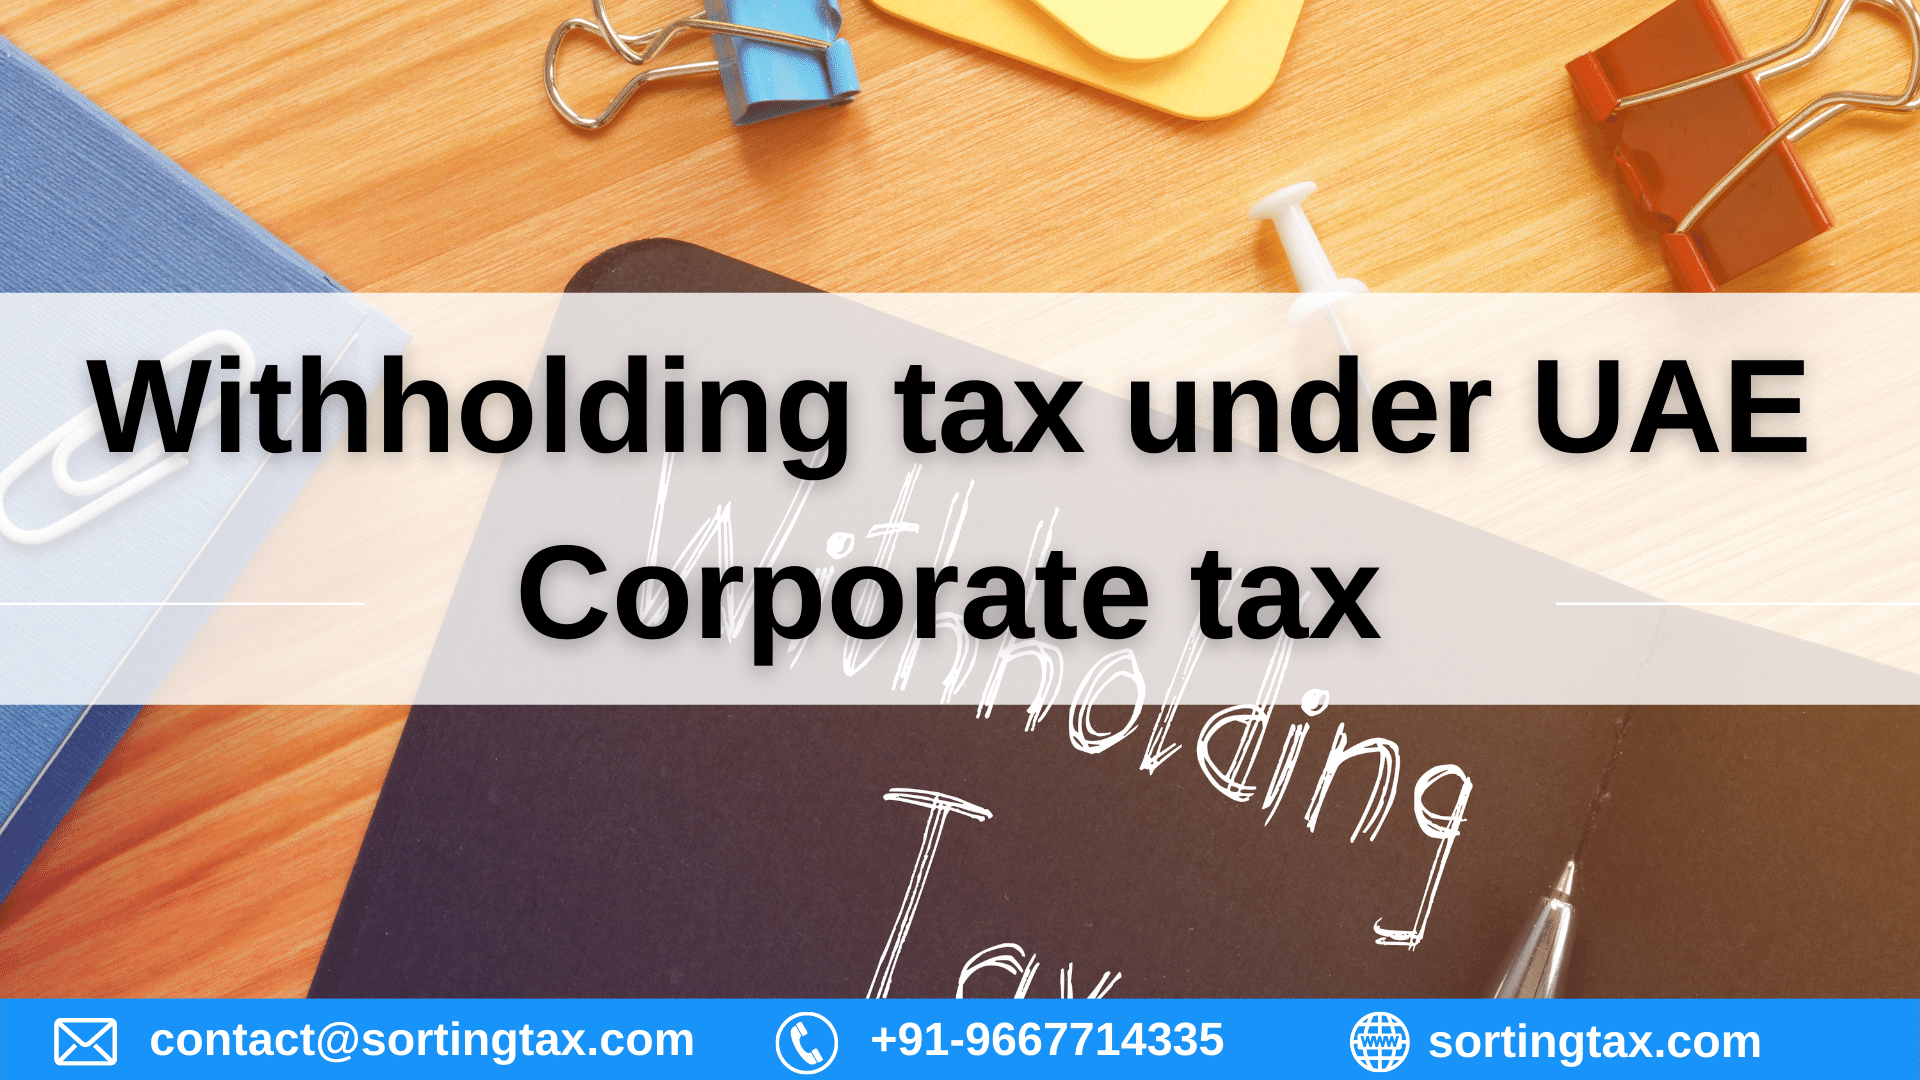 Withholding tax under UAE Corporate tax